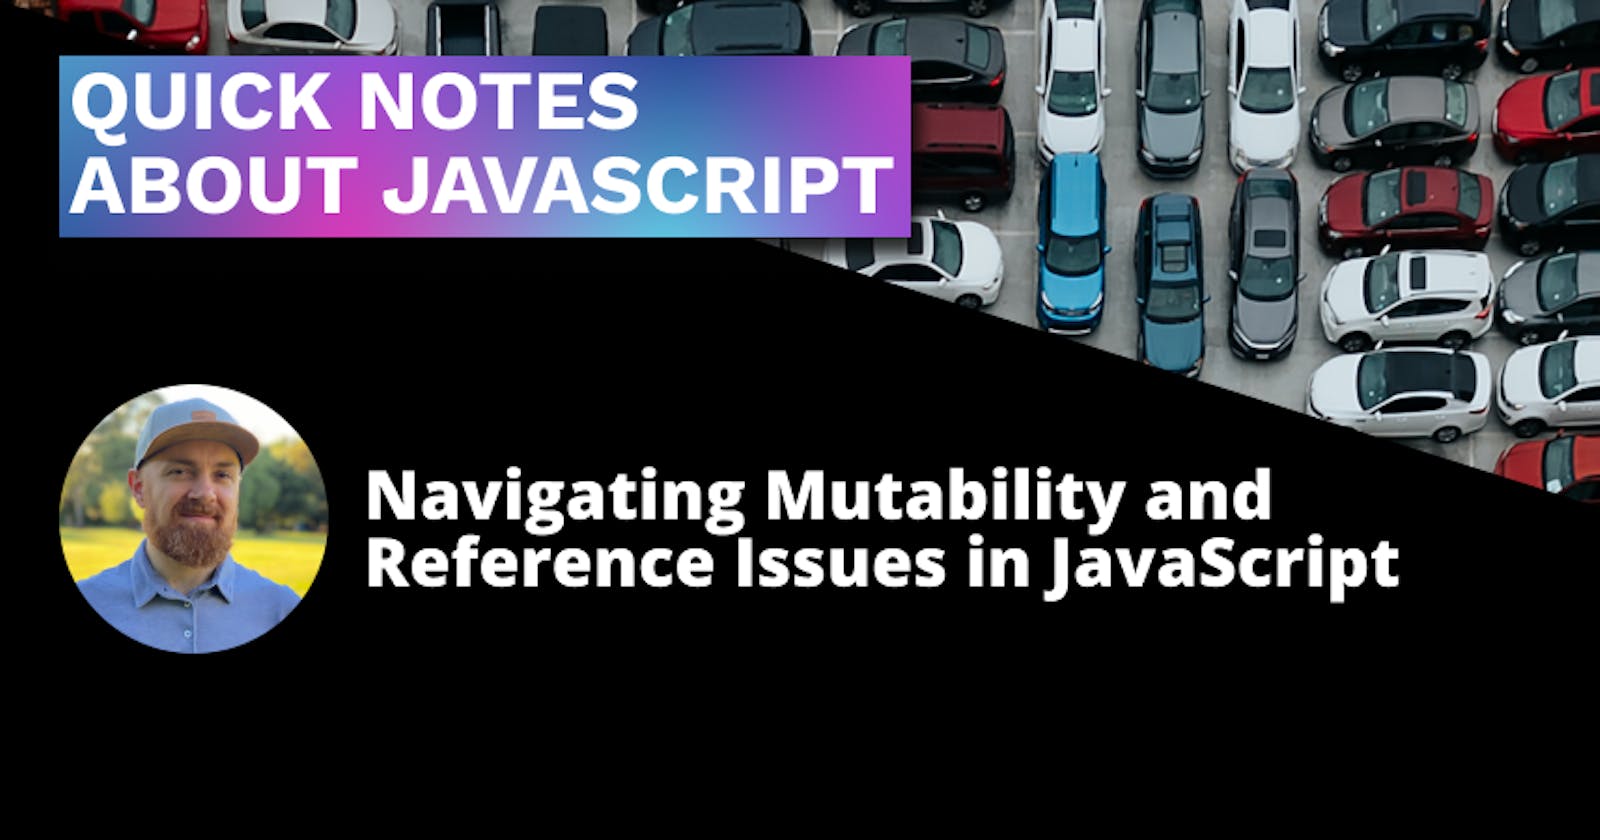 Navigating Mutability and Reference Issues in JavaScript